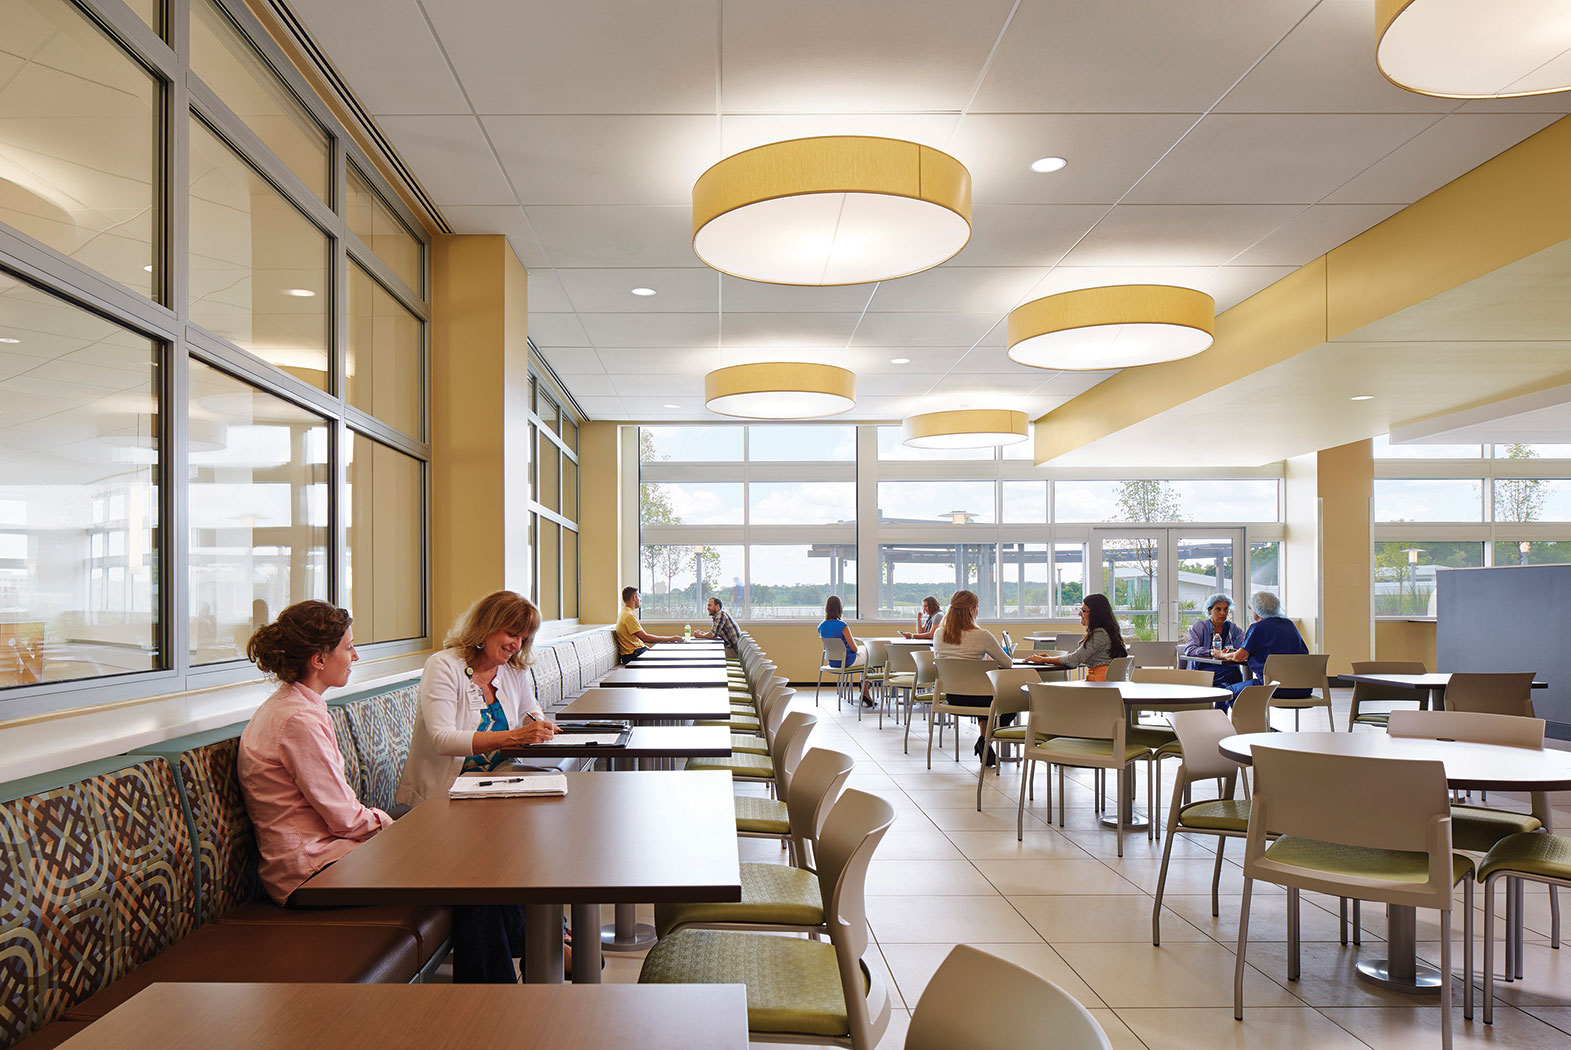 Hospitals take a fresh look on cafeteria design | Health Facilities  Management